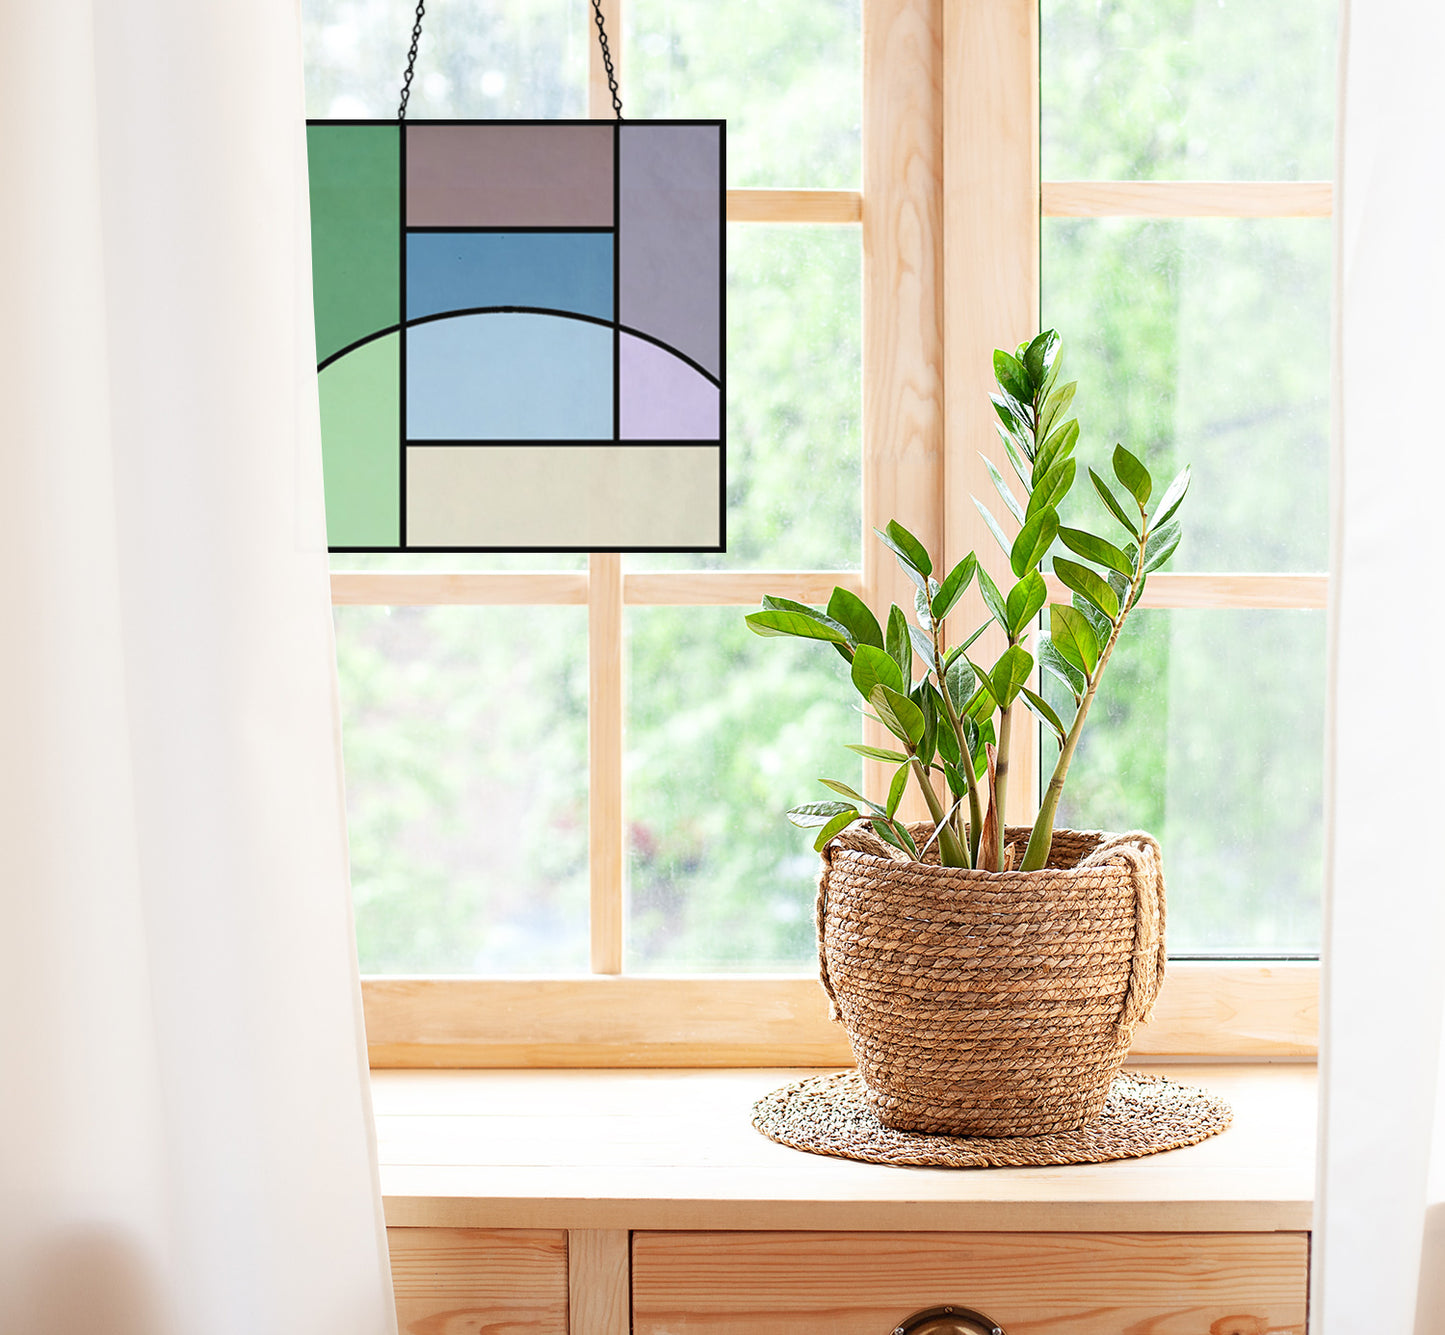 Log Cabin Beginner Stained Glass Pattern